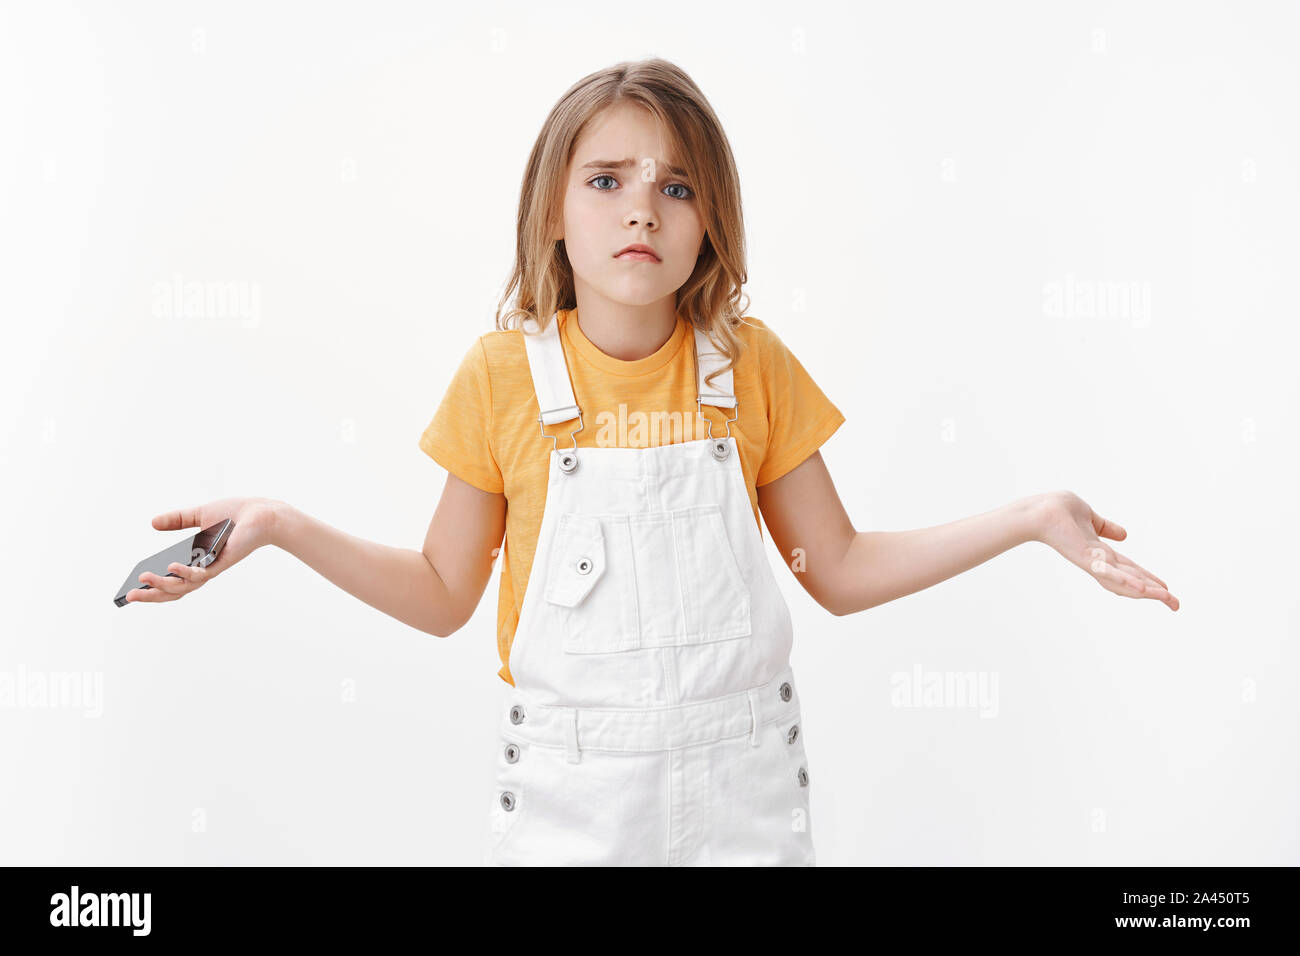 Hopeless cute upset little child, girl spread hands sideways desperate, froning upset and disappointed, hold smartphone, losing level in mobile game, Stock Photo